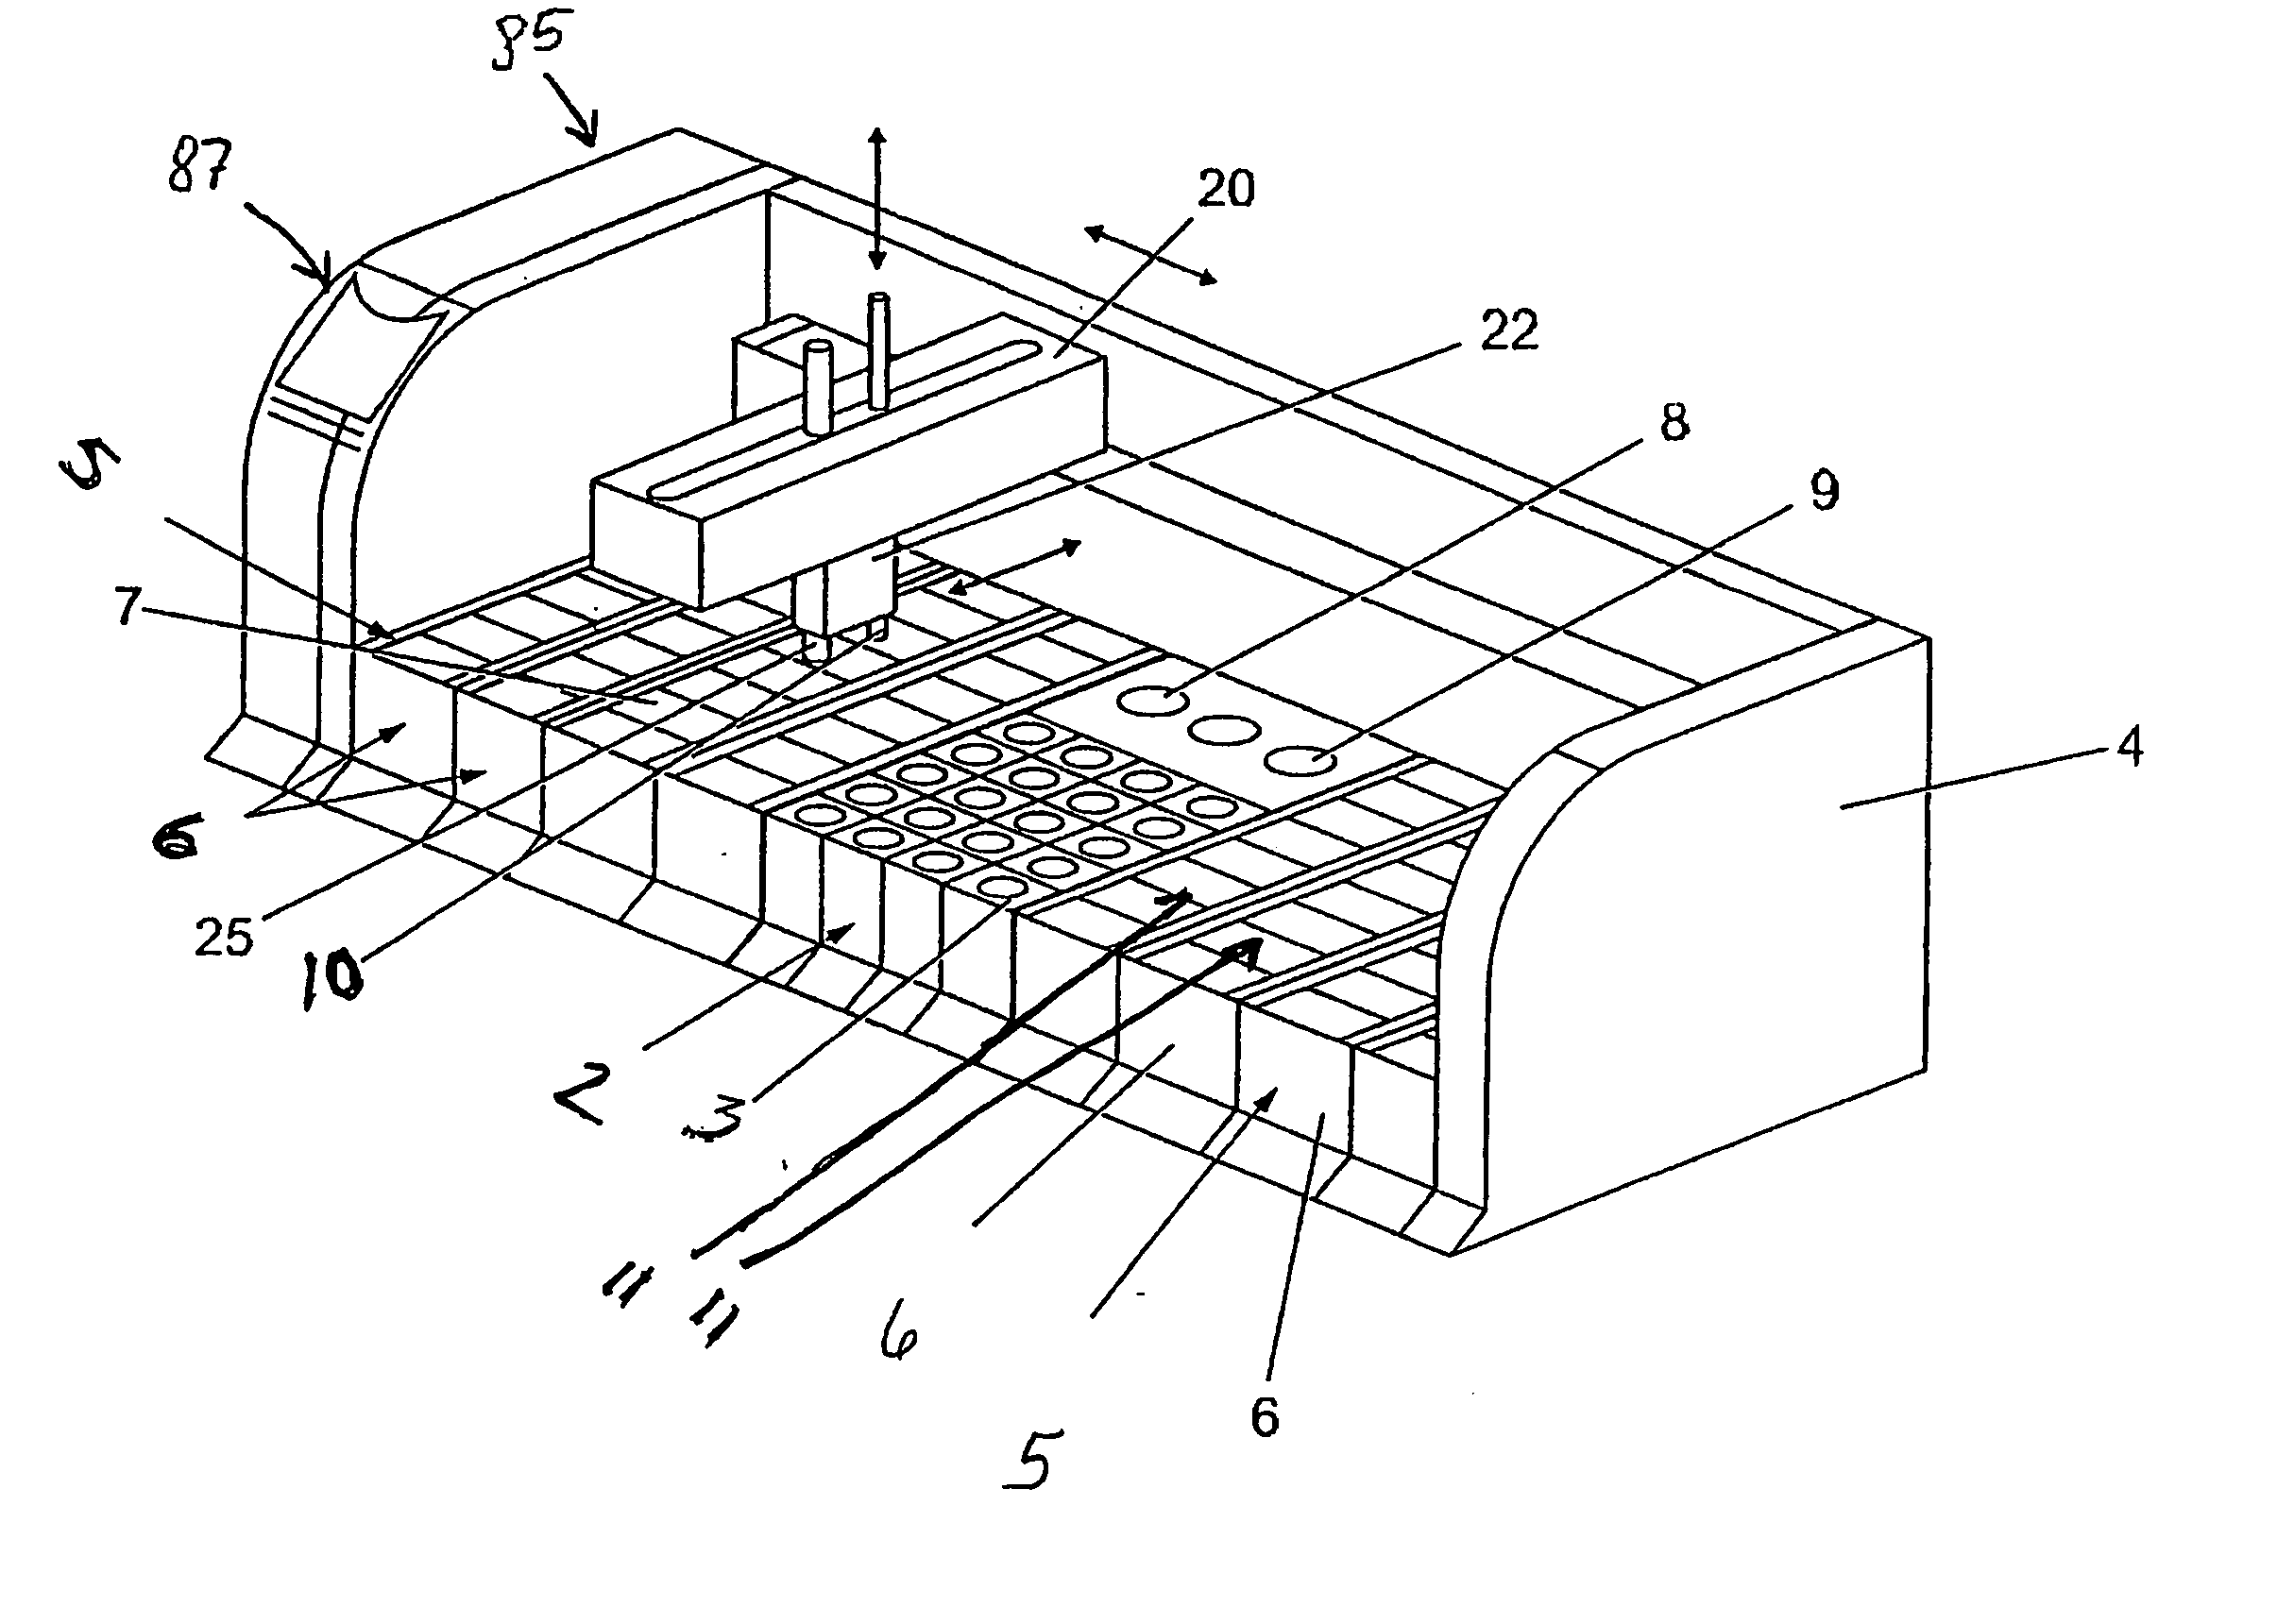 Apparatus for automated processing biological samples